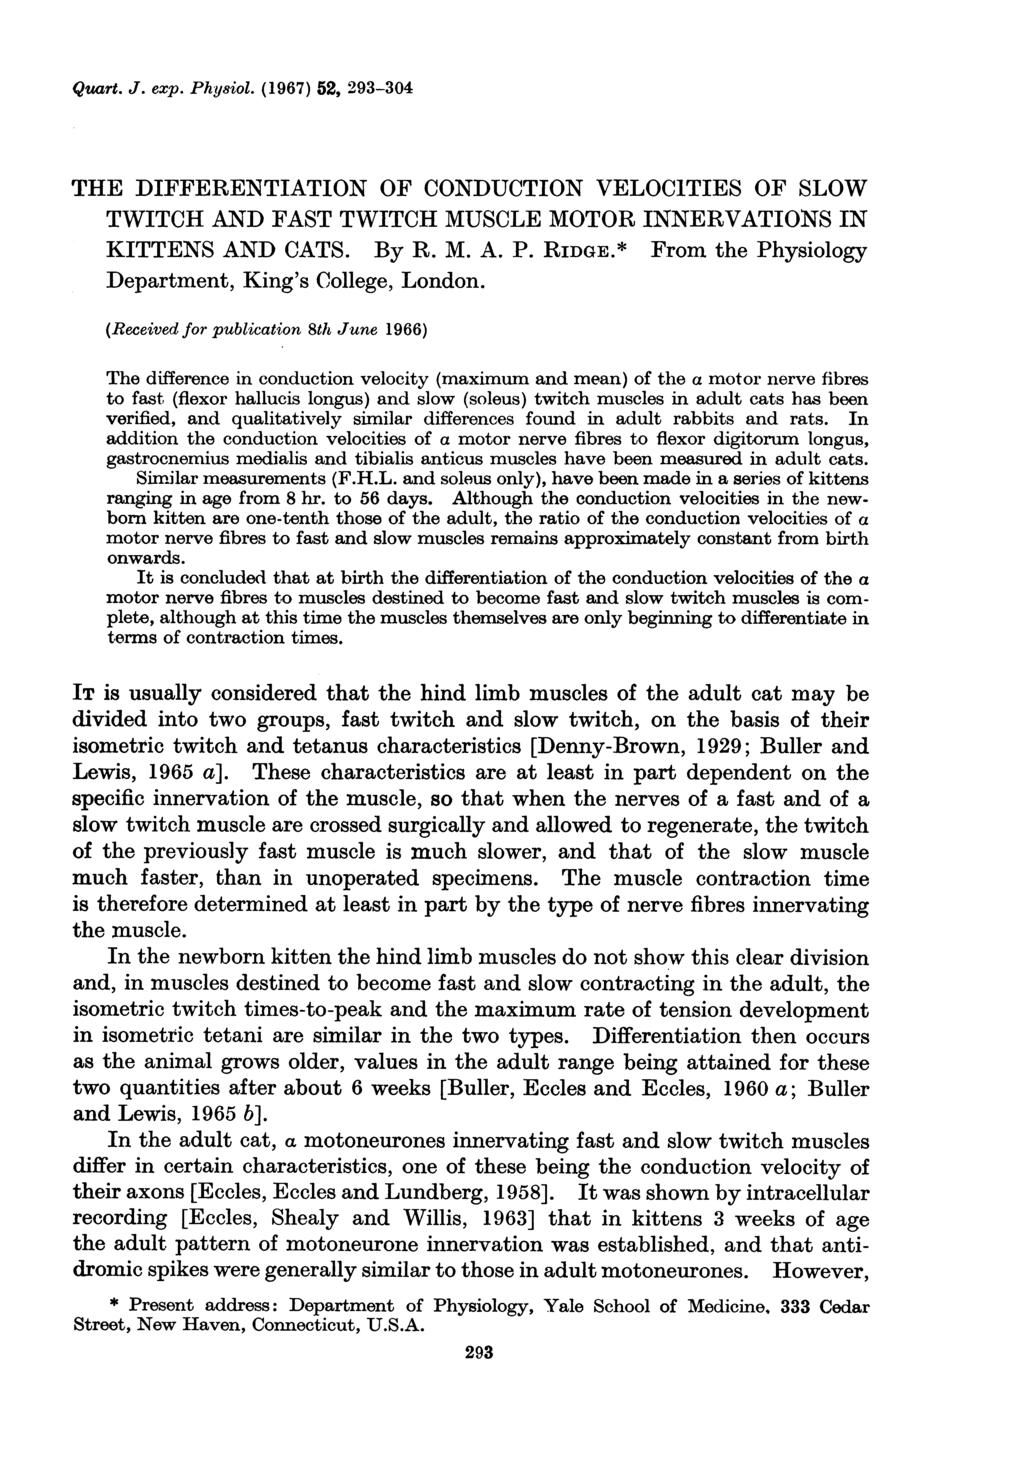 Quart. J. exp. Phy8iol. (1967) 52, 293-304 THE DIFFERENTIATION OF CONDUCTION VELOCITIES OF SLOW TWITCH AND FAST TWITCH MUSCLE MOTOR INNERVATIONS IN KITTENS AND CATS. By R. M. A. P. RIDGE.